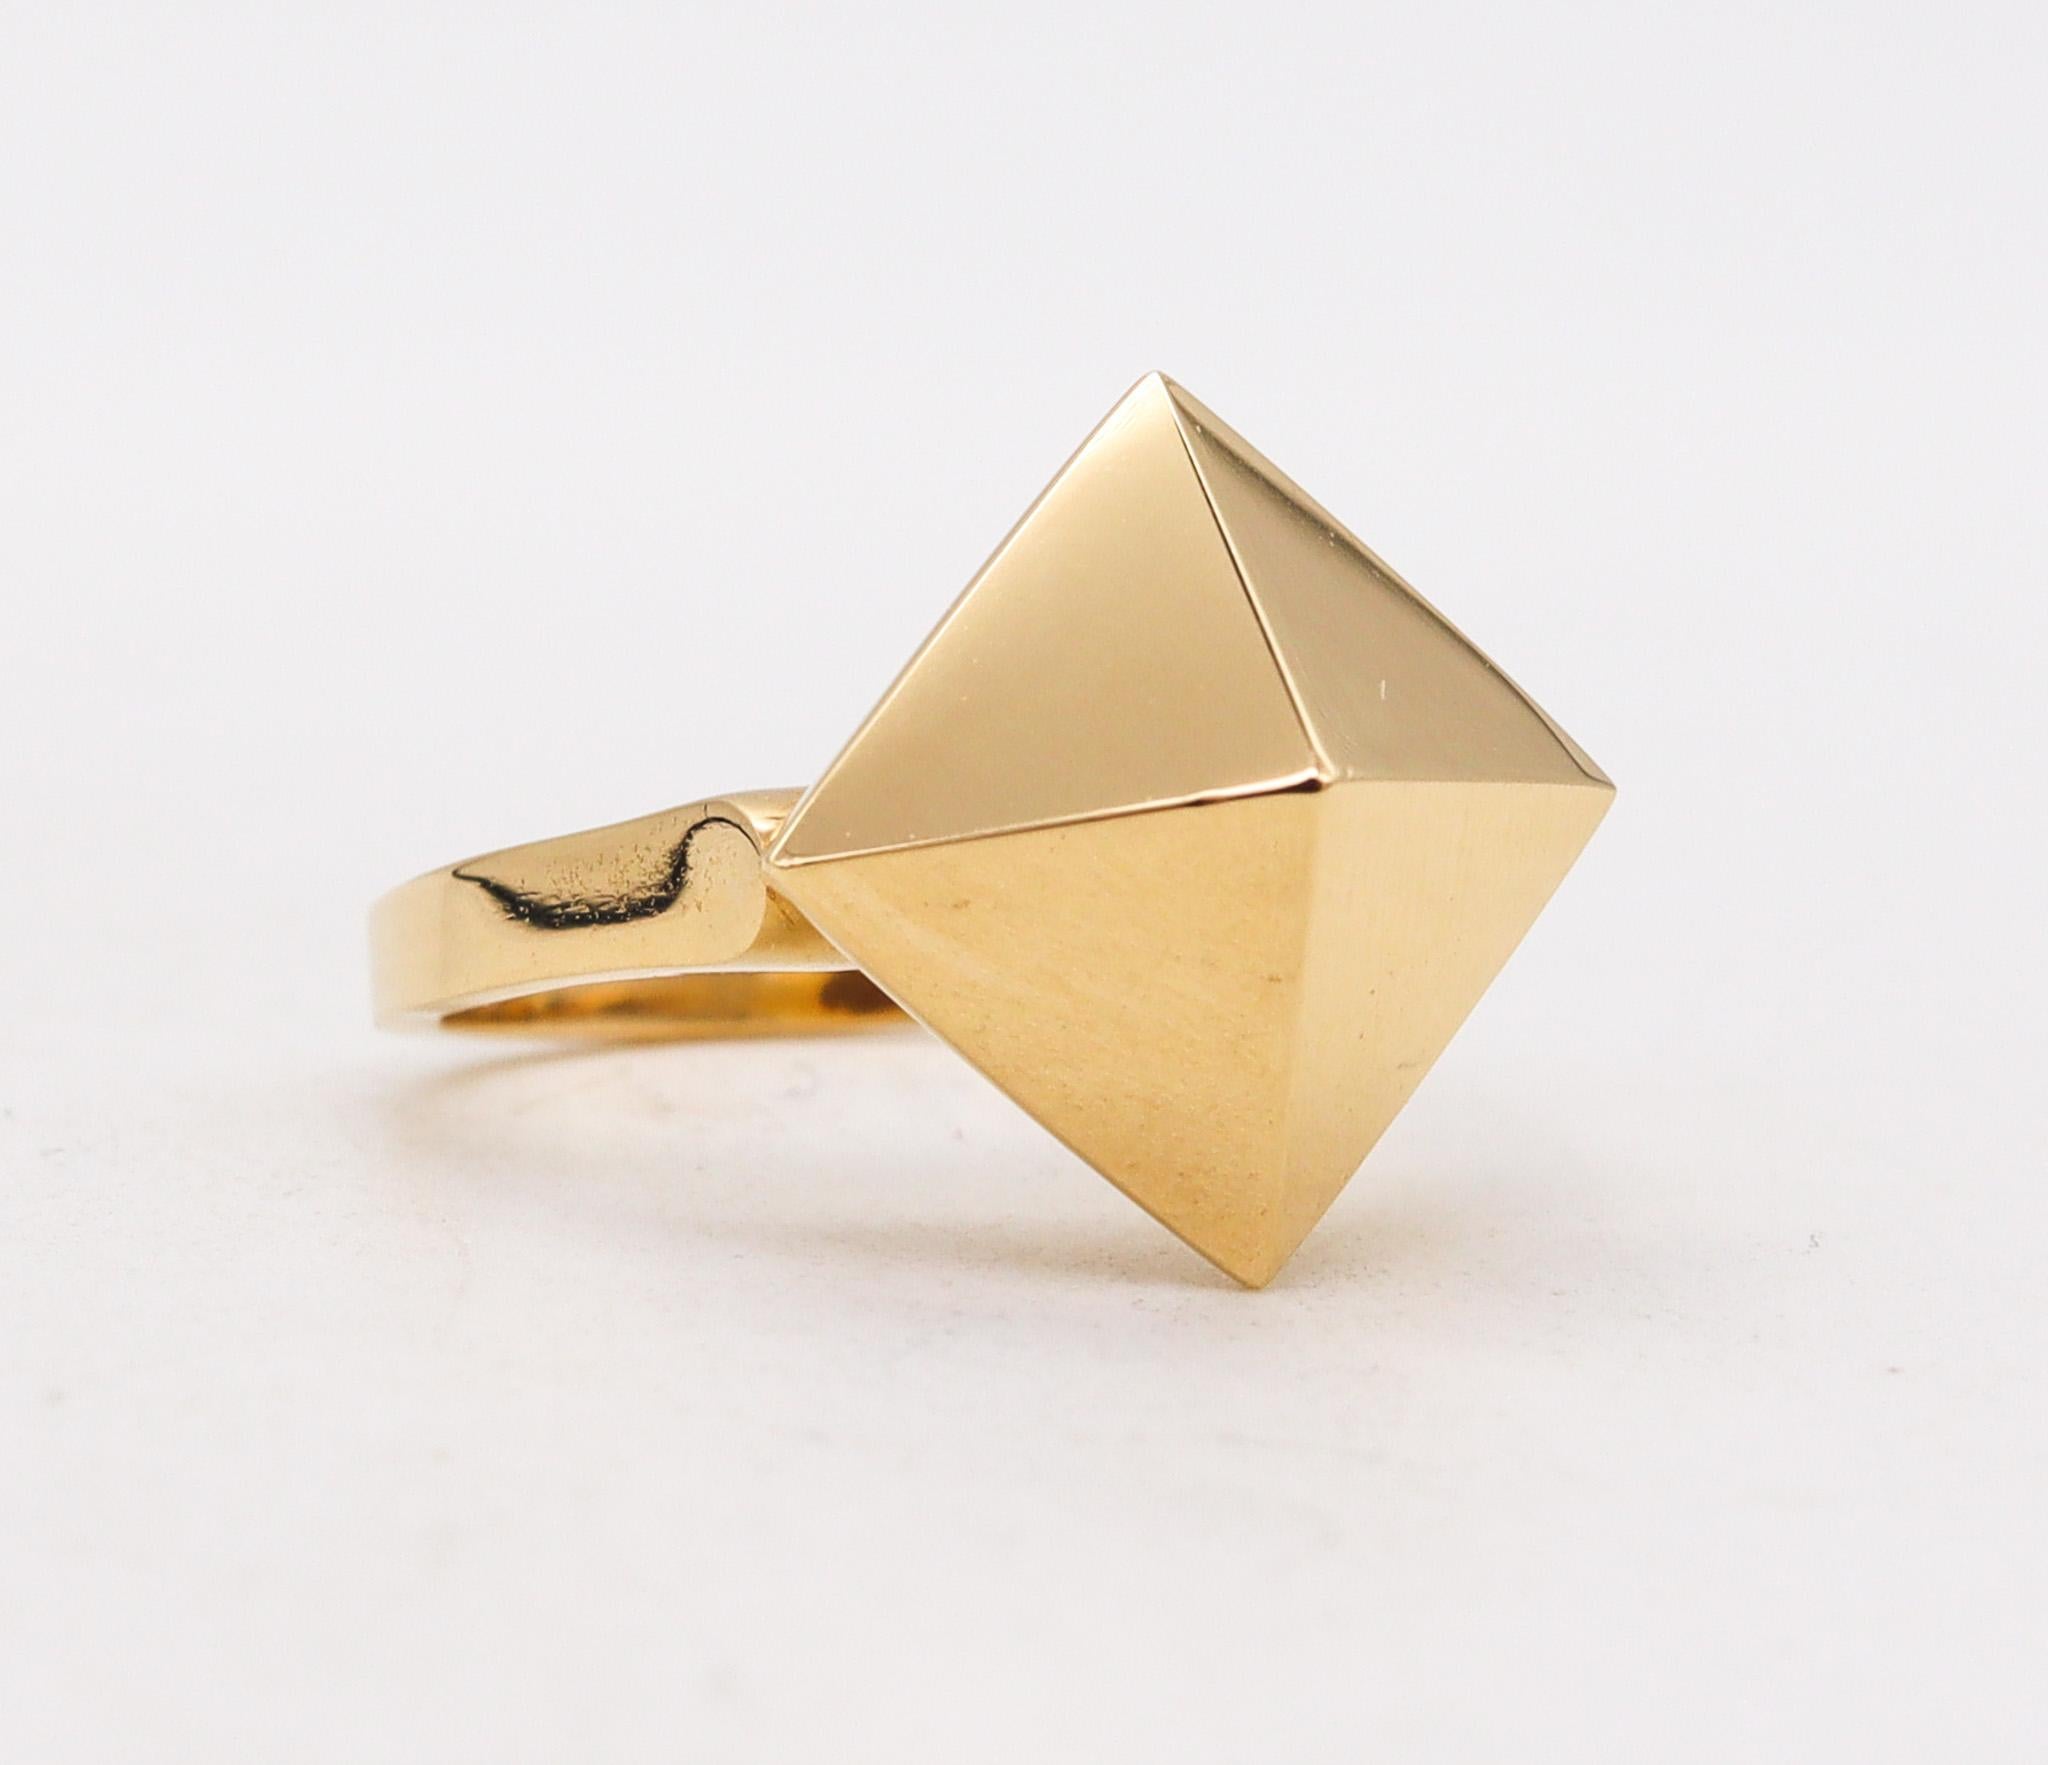 Stackable ring designed by the Aletto Brothers.

A contemporary stackable ring, created by the Italo-American jewelry designers Aletto Brothers. This ring has been masterfully crafted in solid yellow gold of 18 karats with high polished finish.